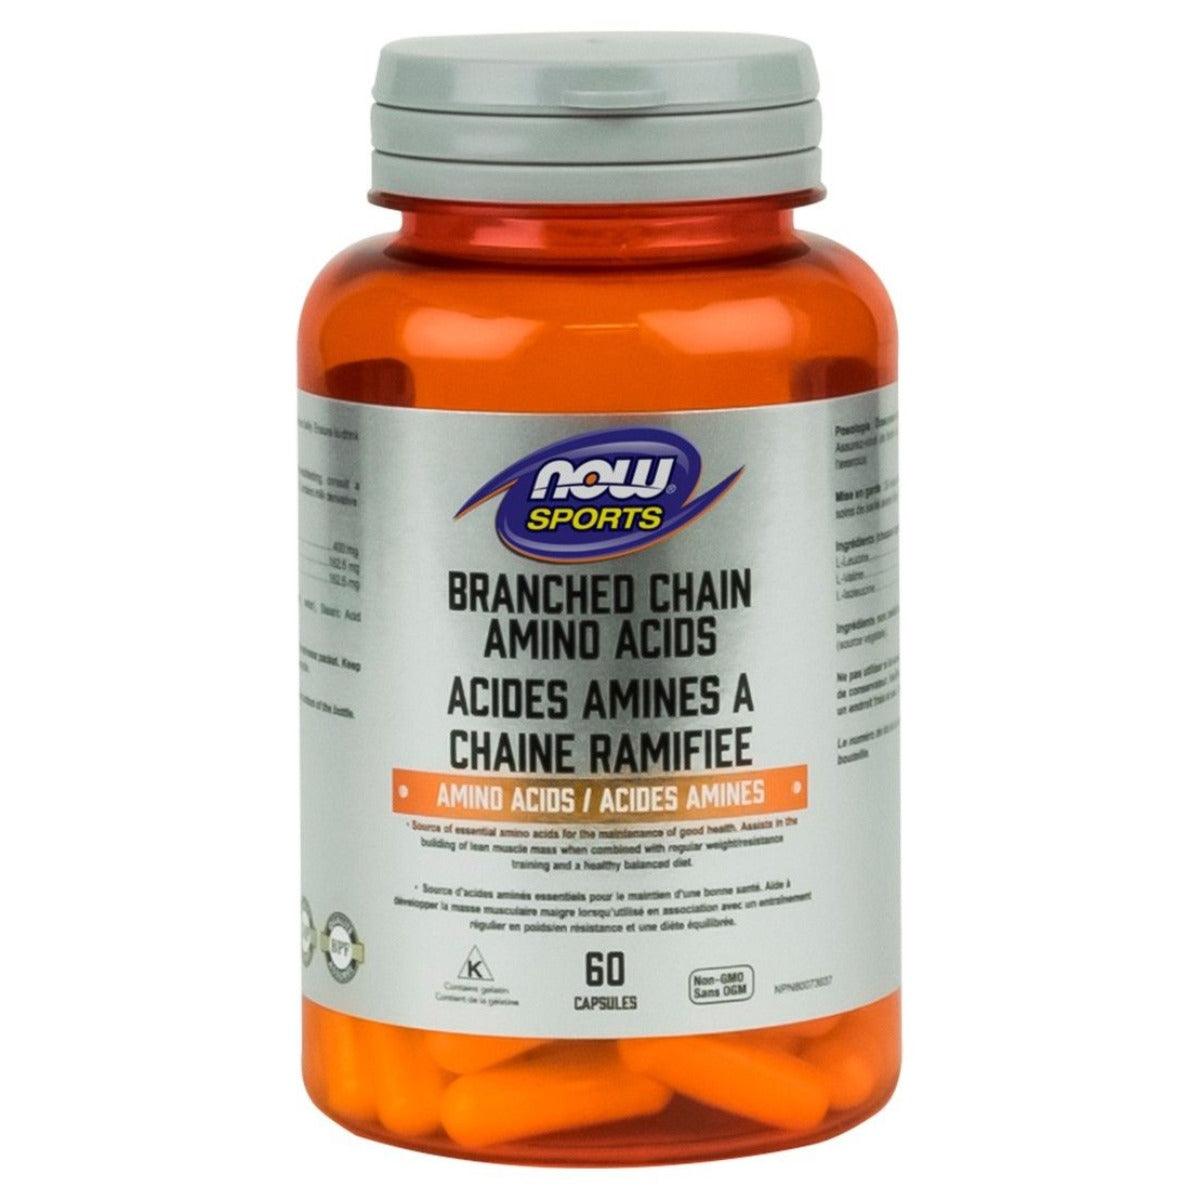 NOW Sports Branched Chain Amino Acid 60 Caps Supplements - Amino Acids at Village Vitamin Store